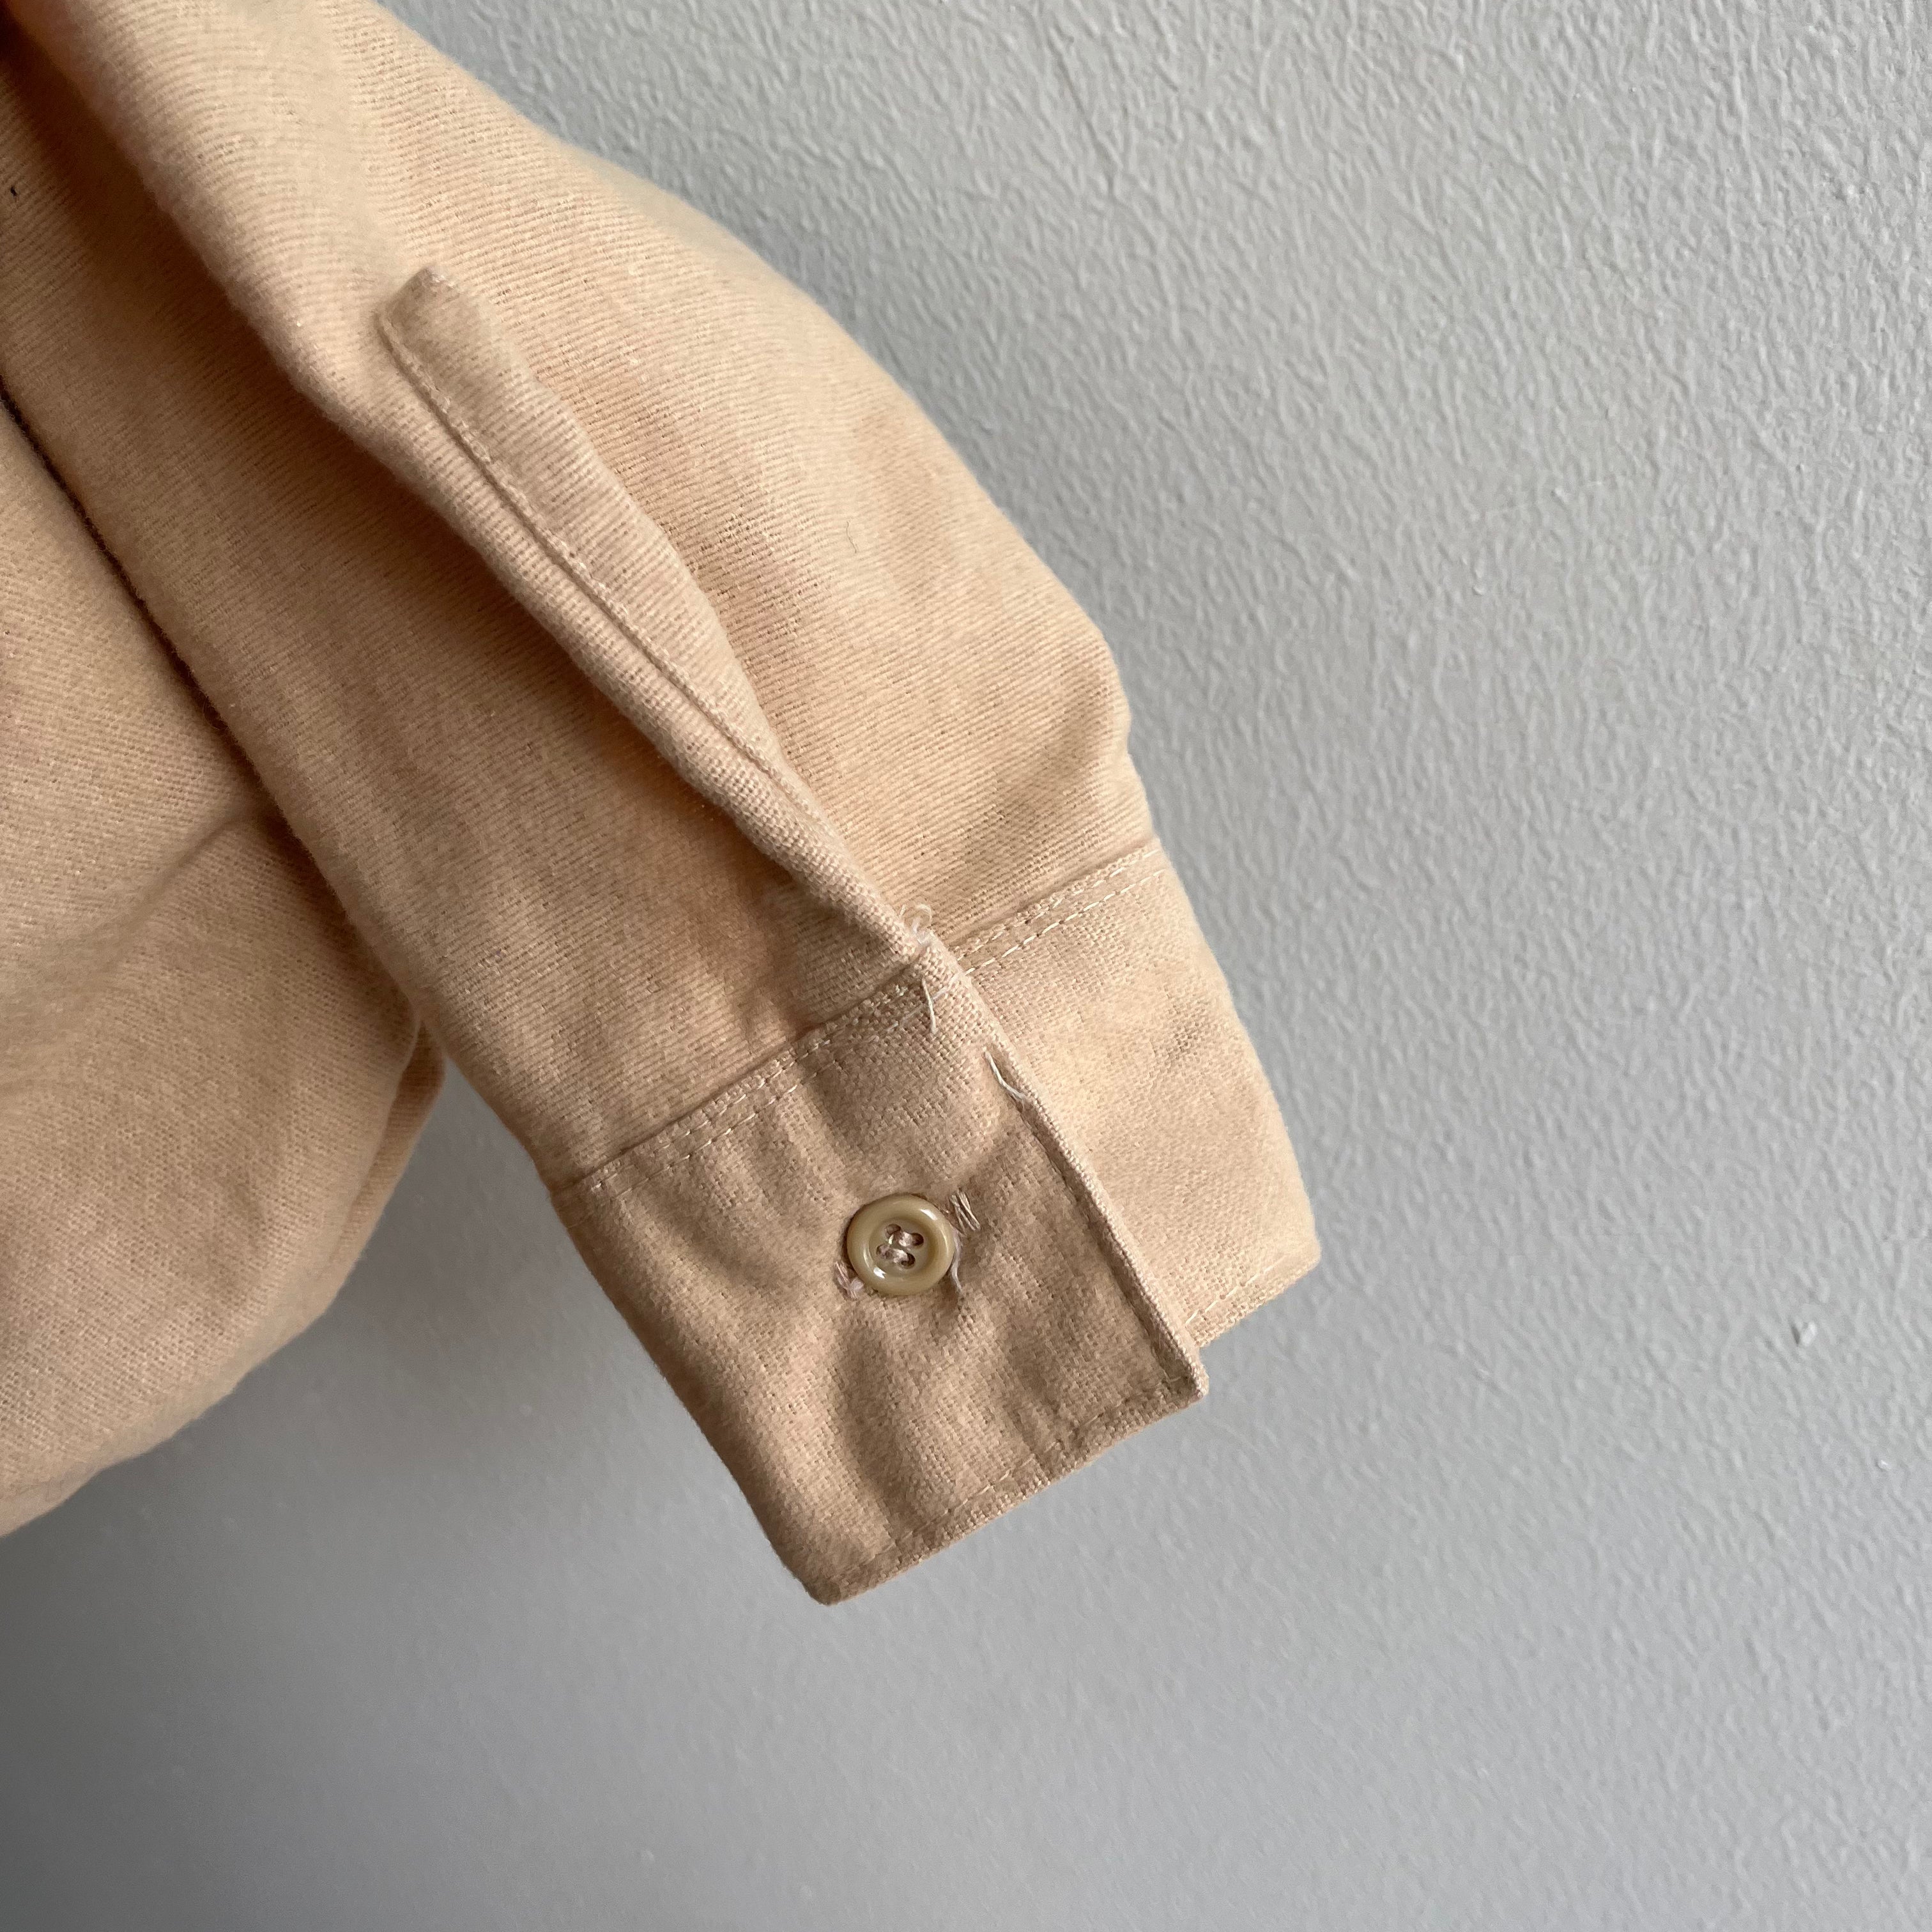 1980s Five Brothers Light Camel Cotton Chamois Shirt